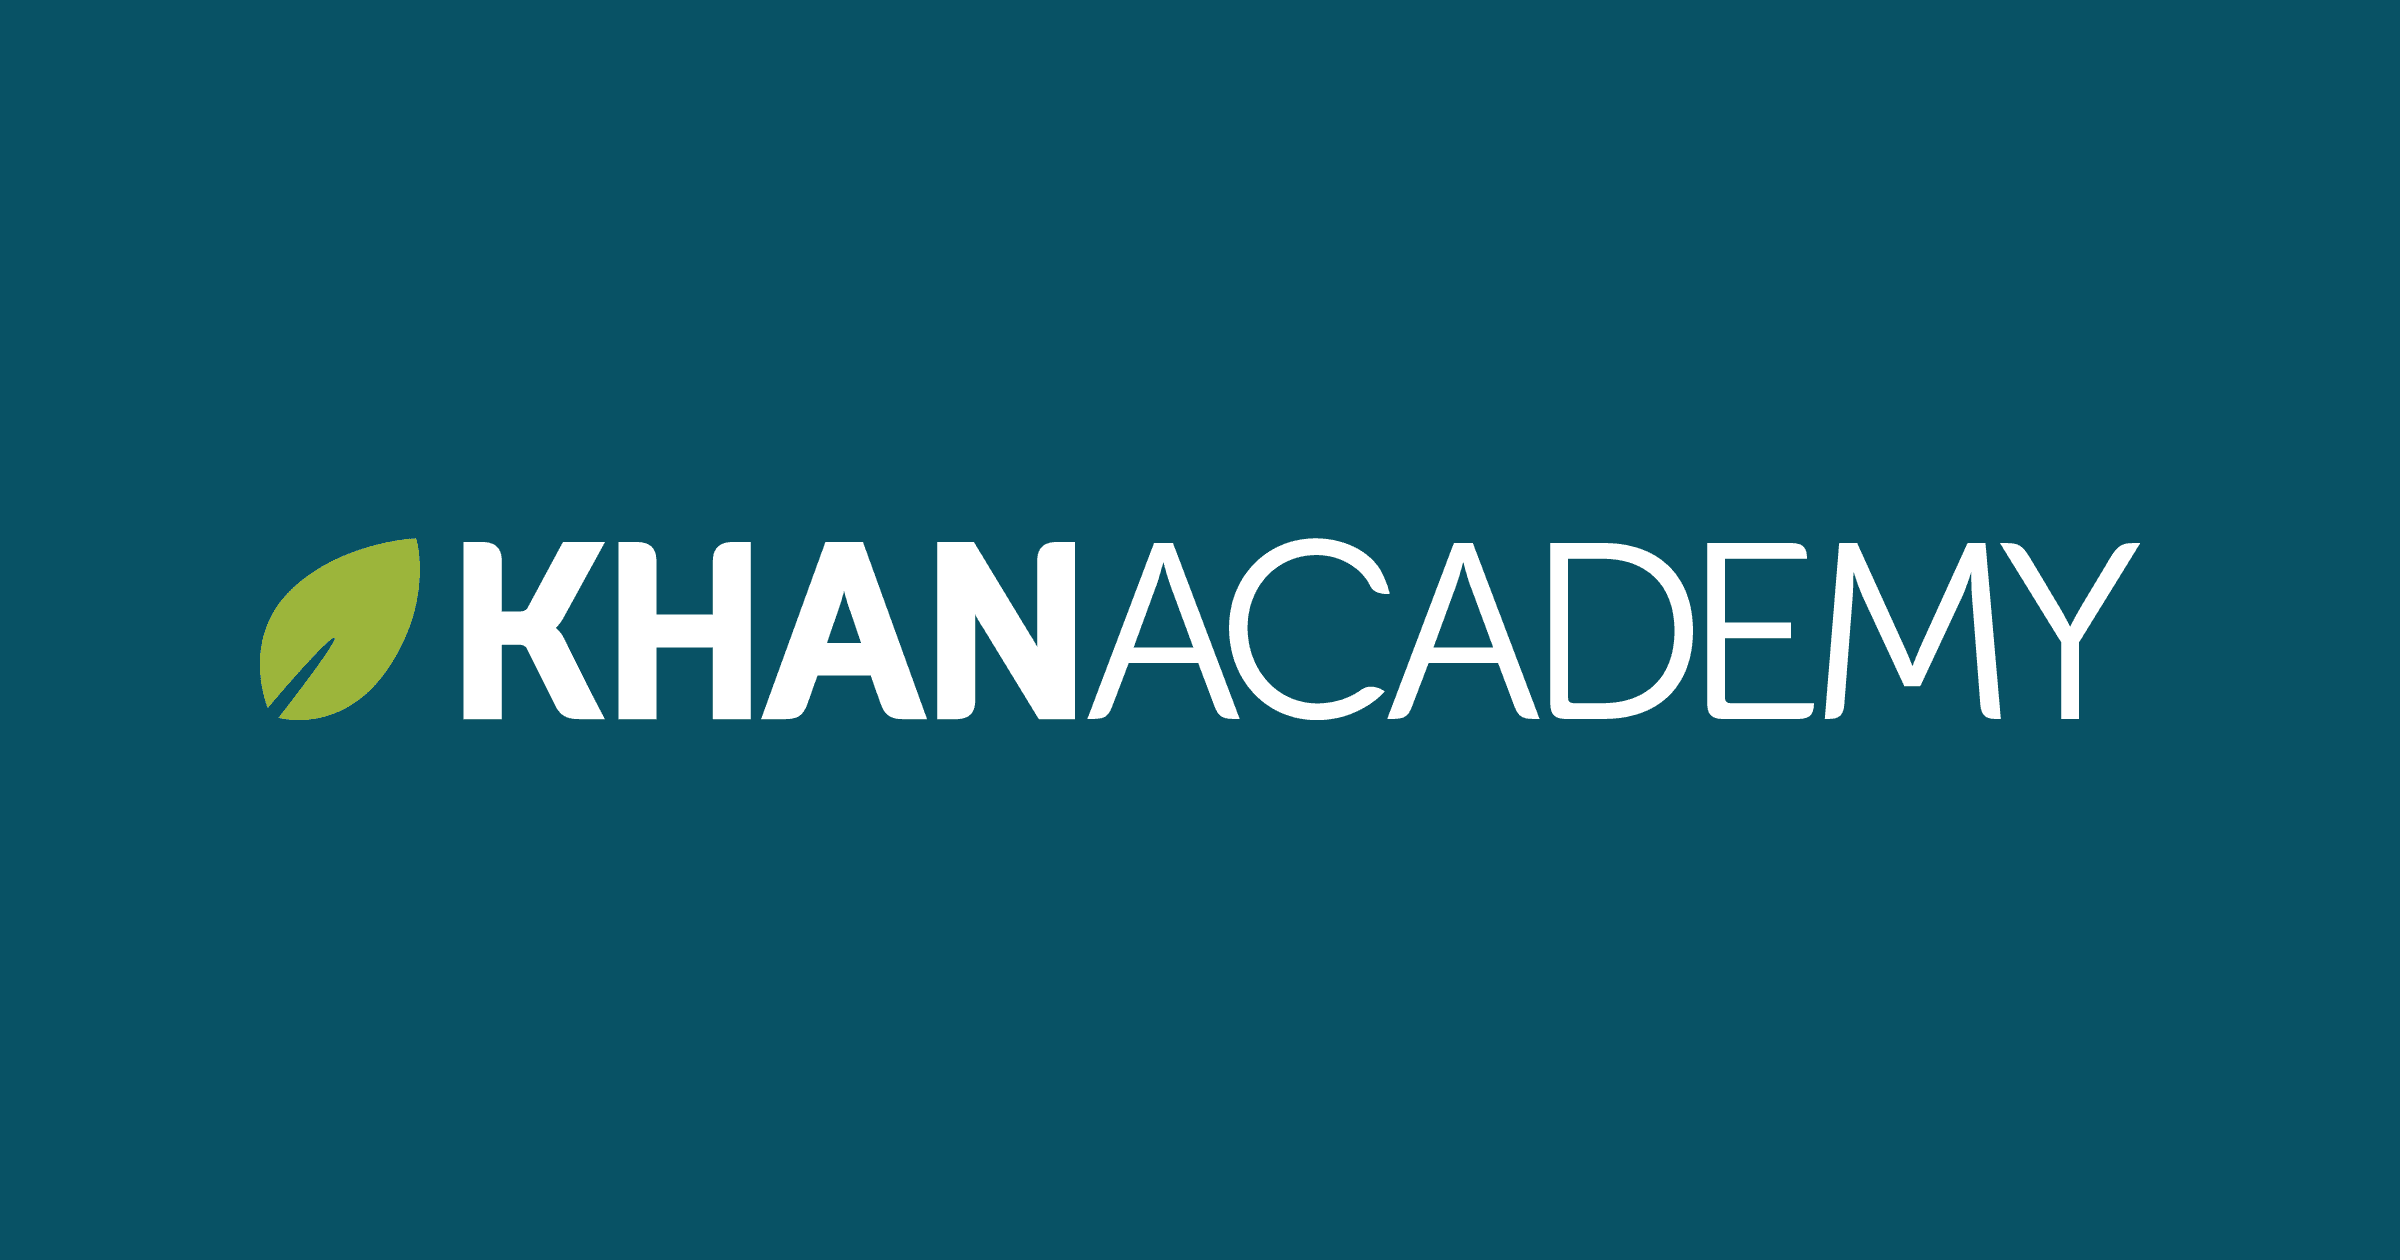 Khan Academy Answers: Tips, Tricks and Important Hacks